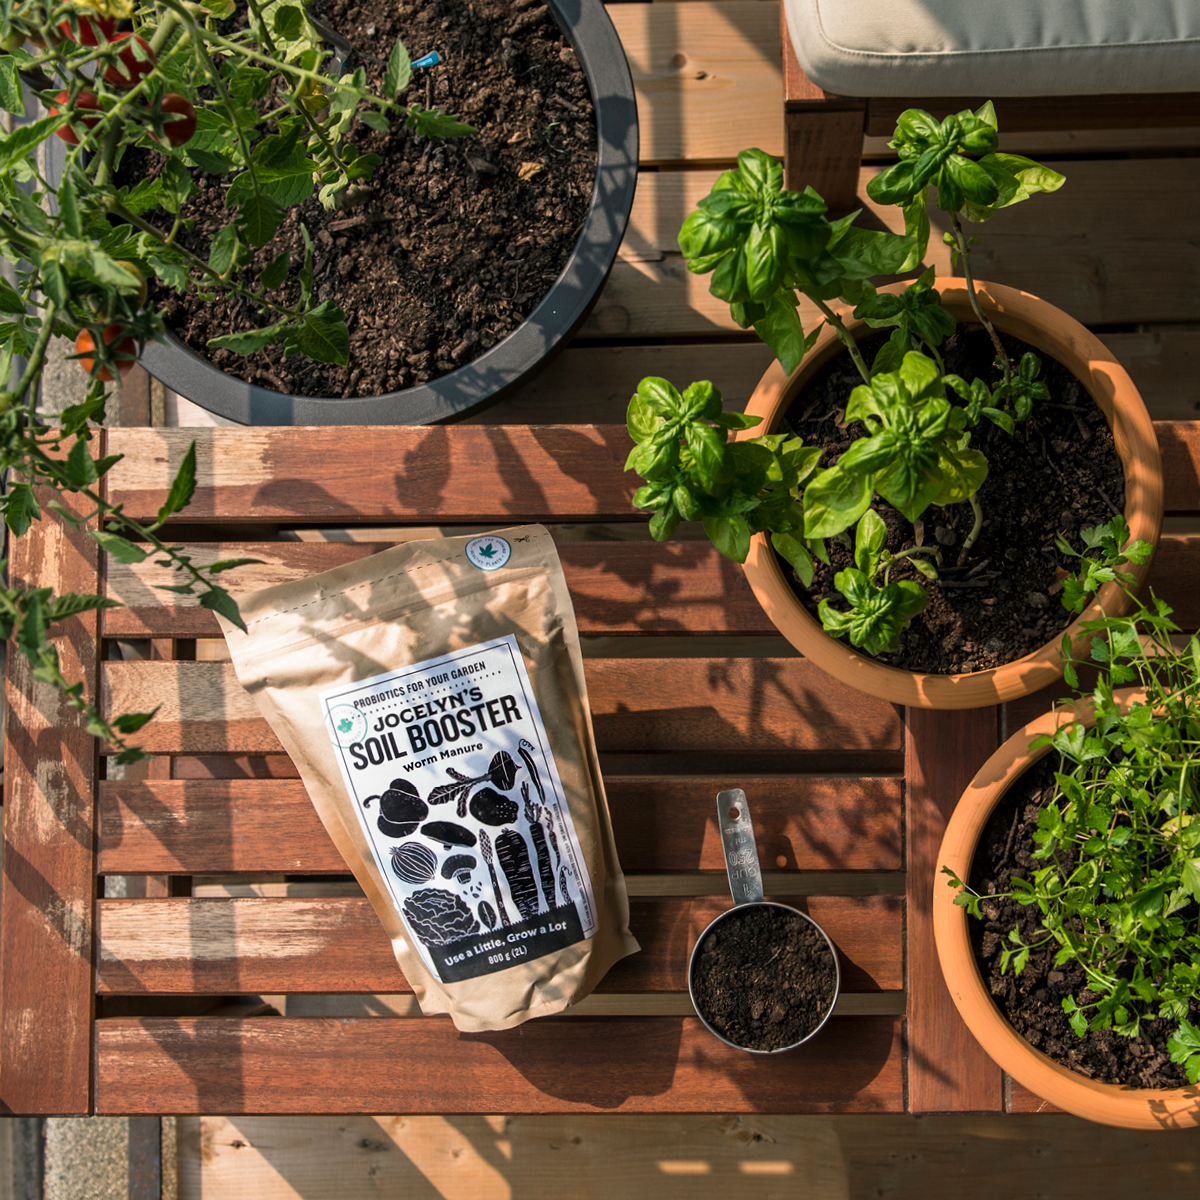 Bag of Jocelyn's Soil booster on a wooden table next to plants